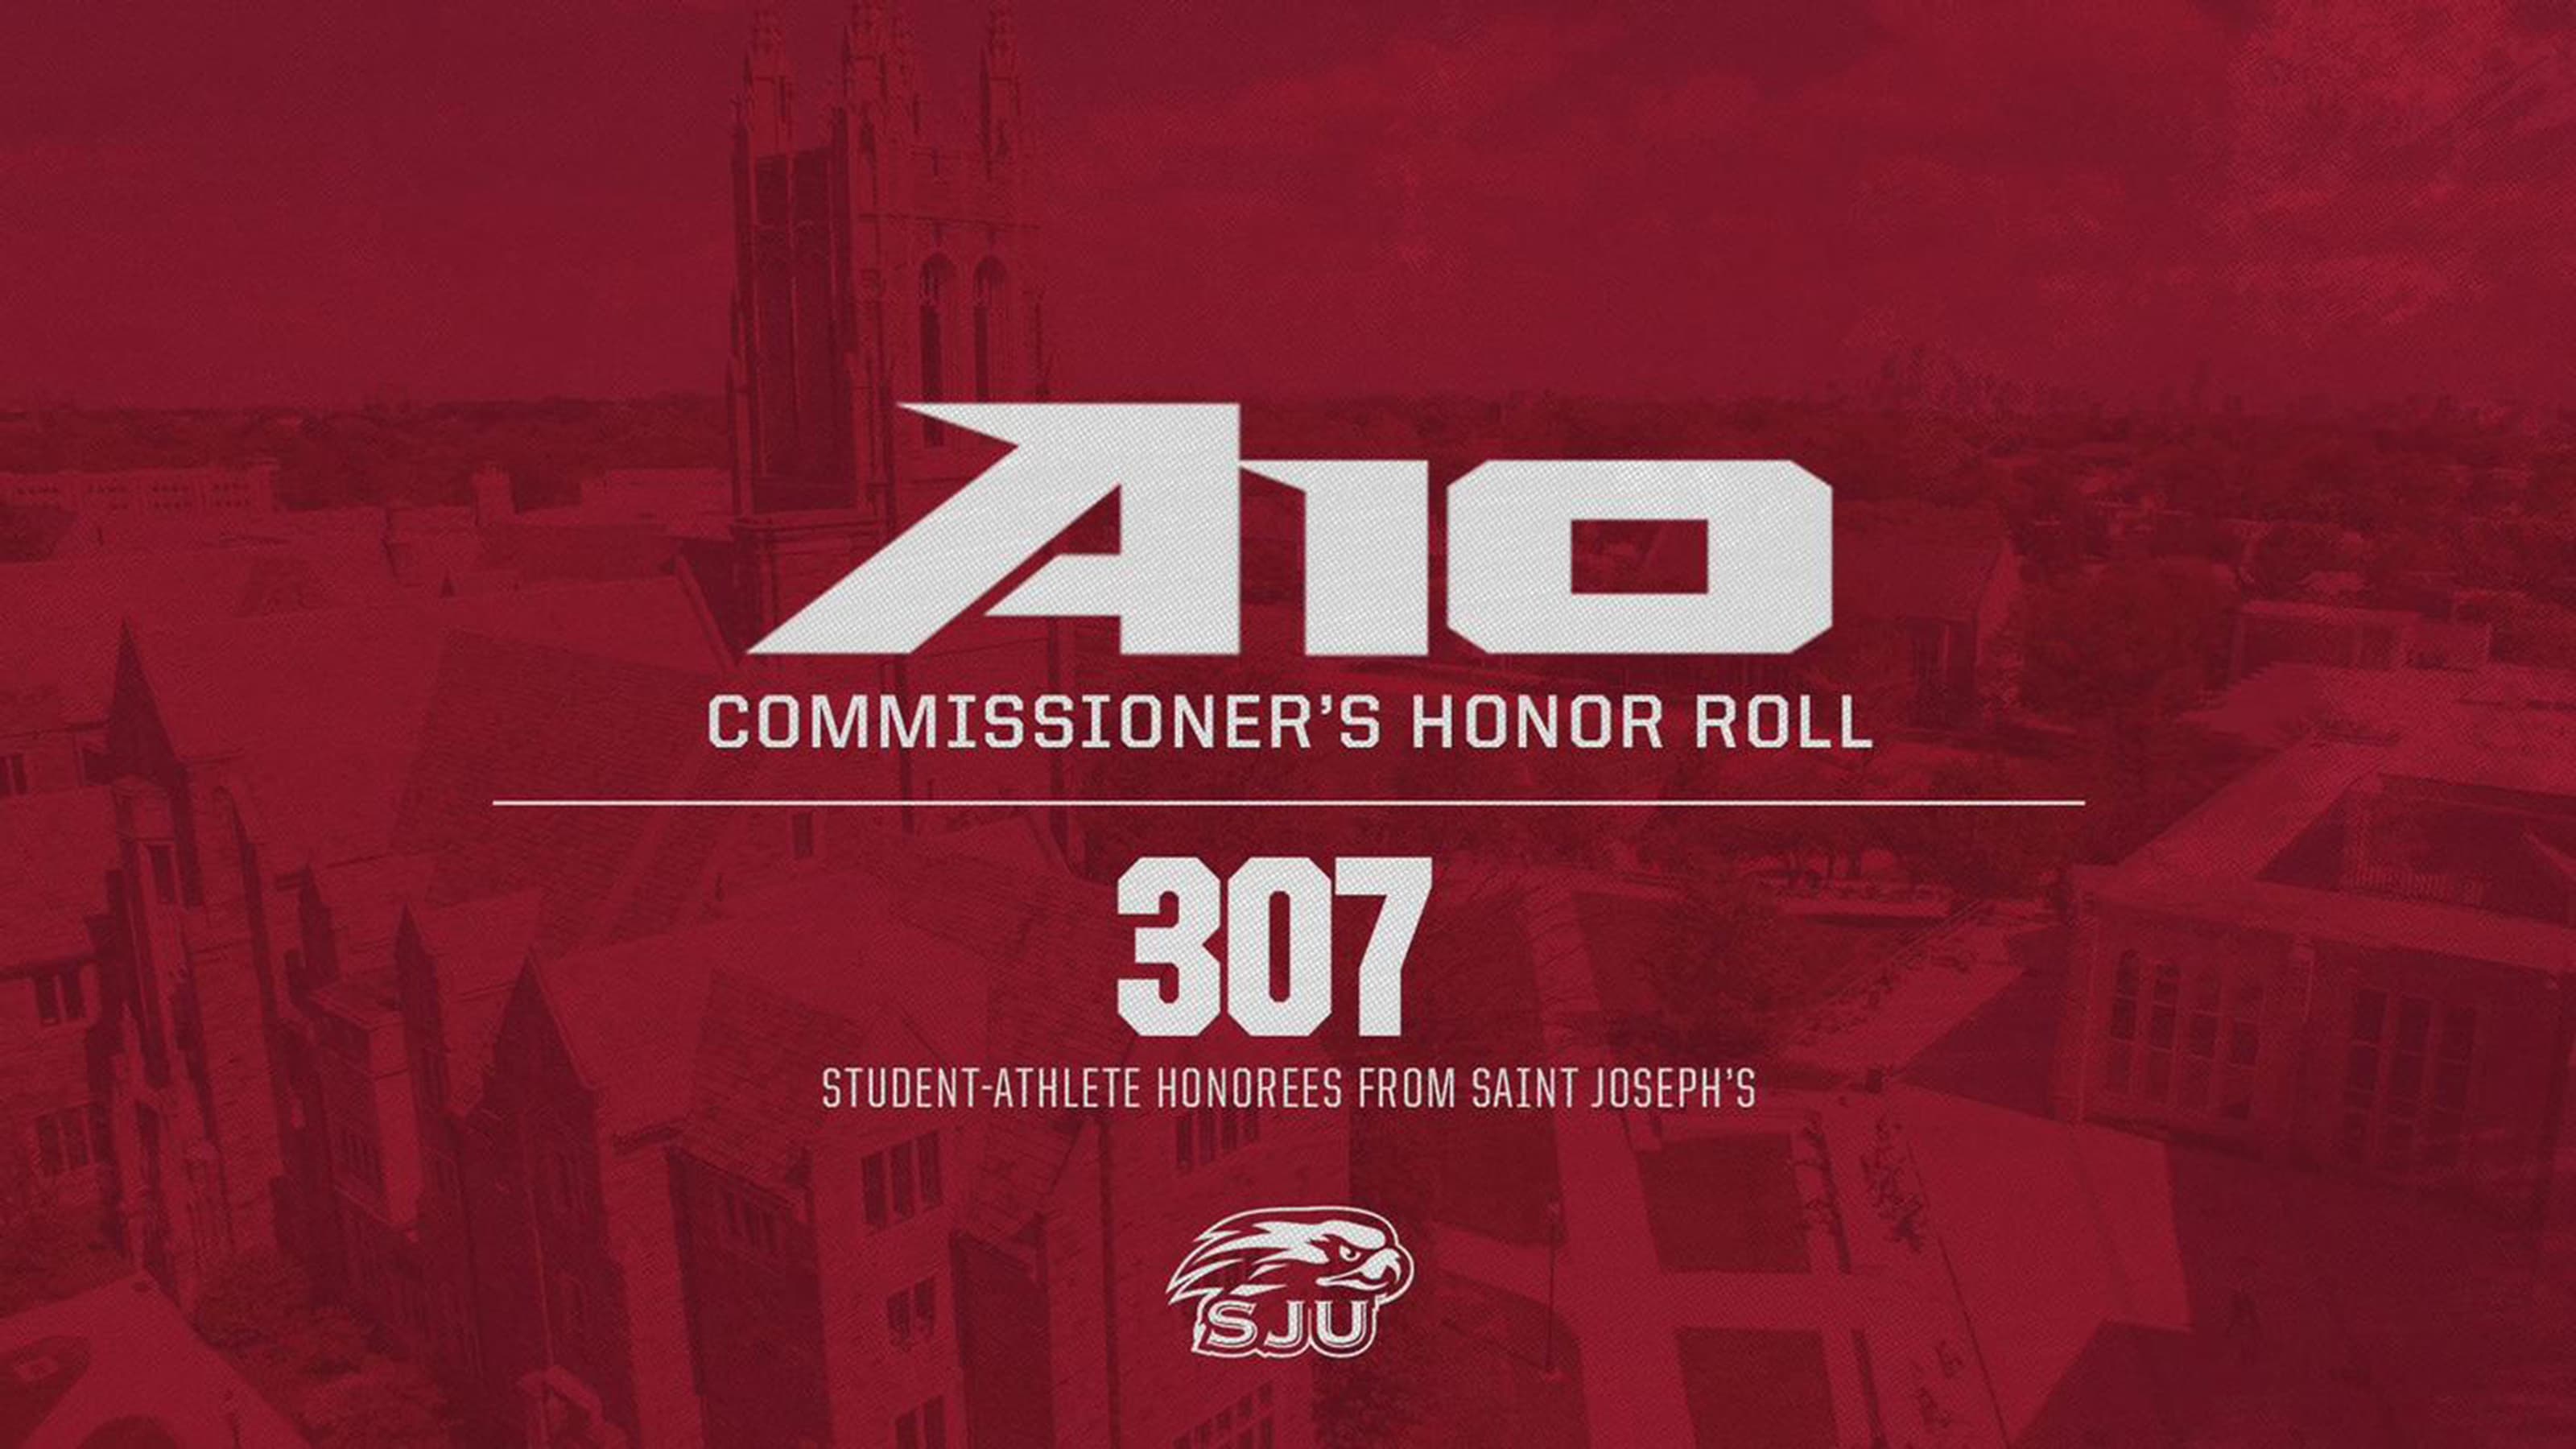 Graphic design honoring A10 honor roll student-athletes